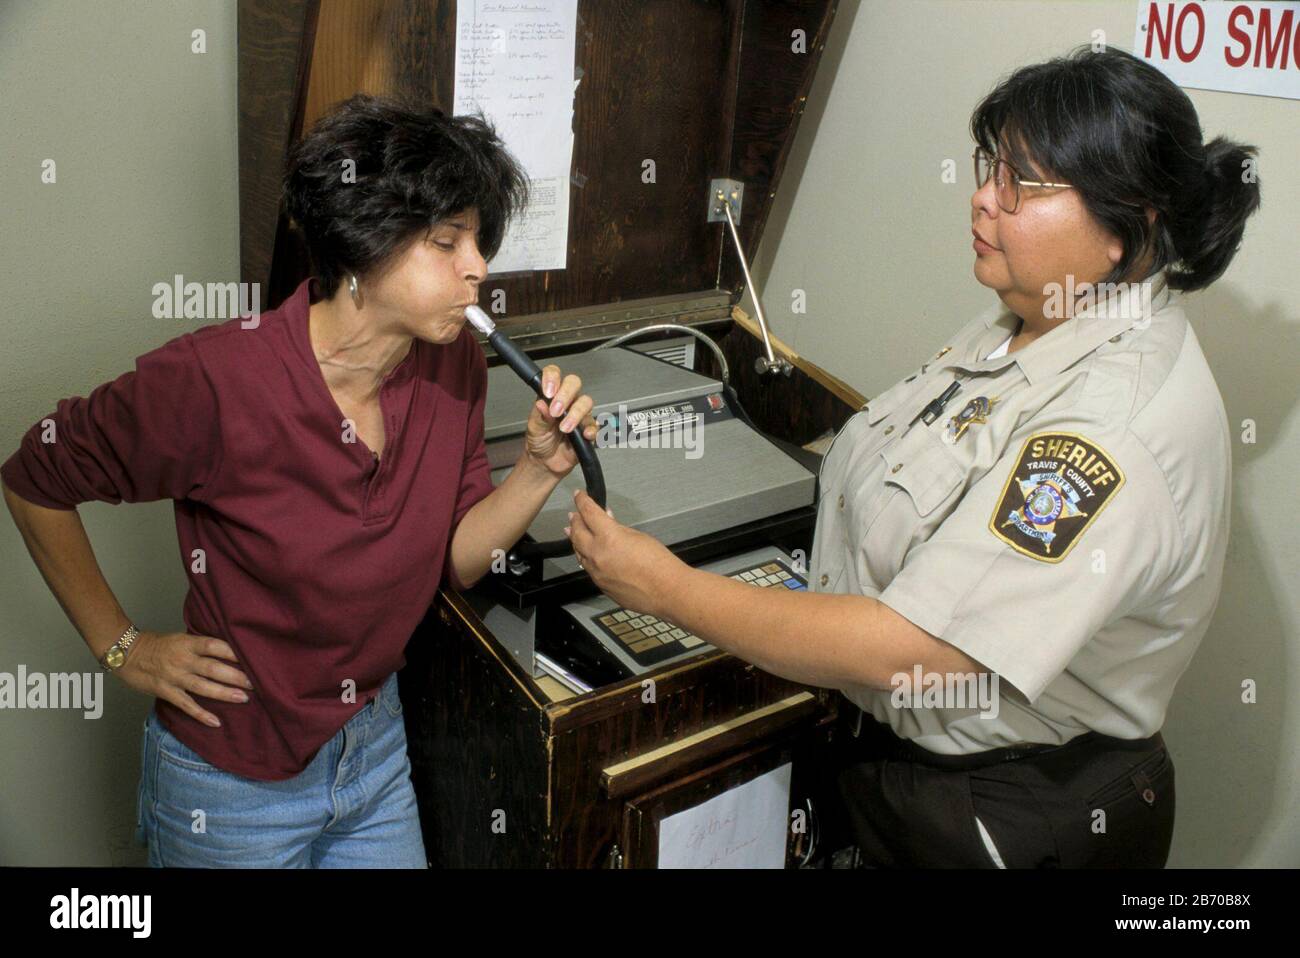 Austin Texas USA, 1997: Driving While Intoxicated (DWI) suspect blows into tube to take breathalyzer test administered by sheriff's office technician. MR ©Bob Daemmrich Stock Photo